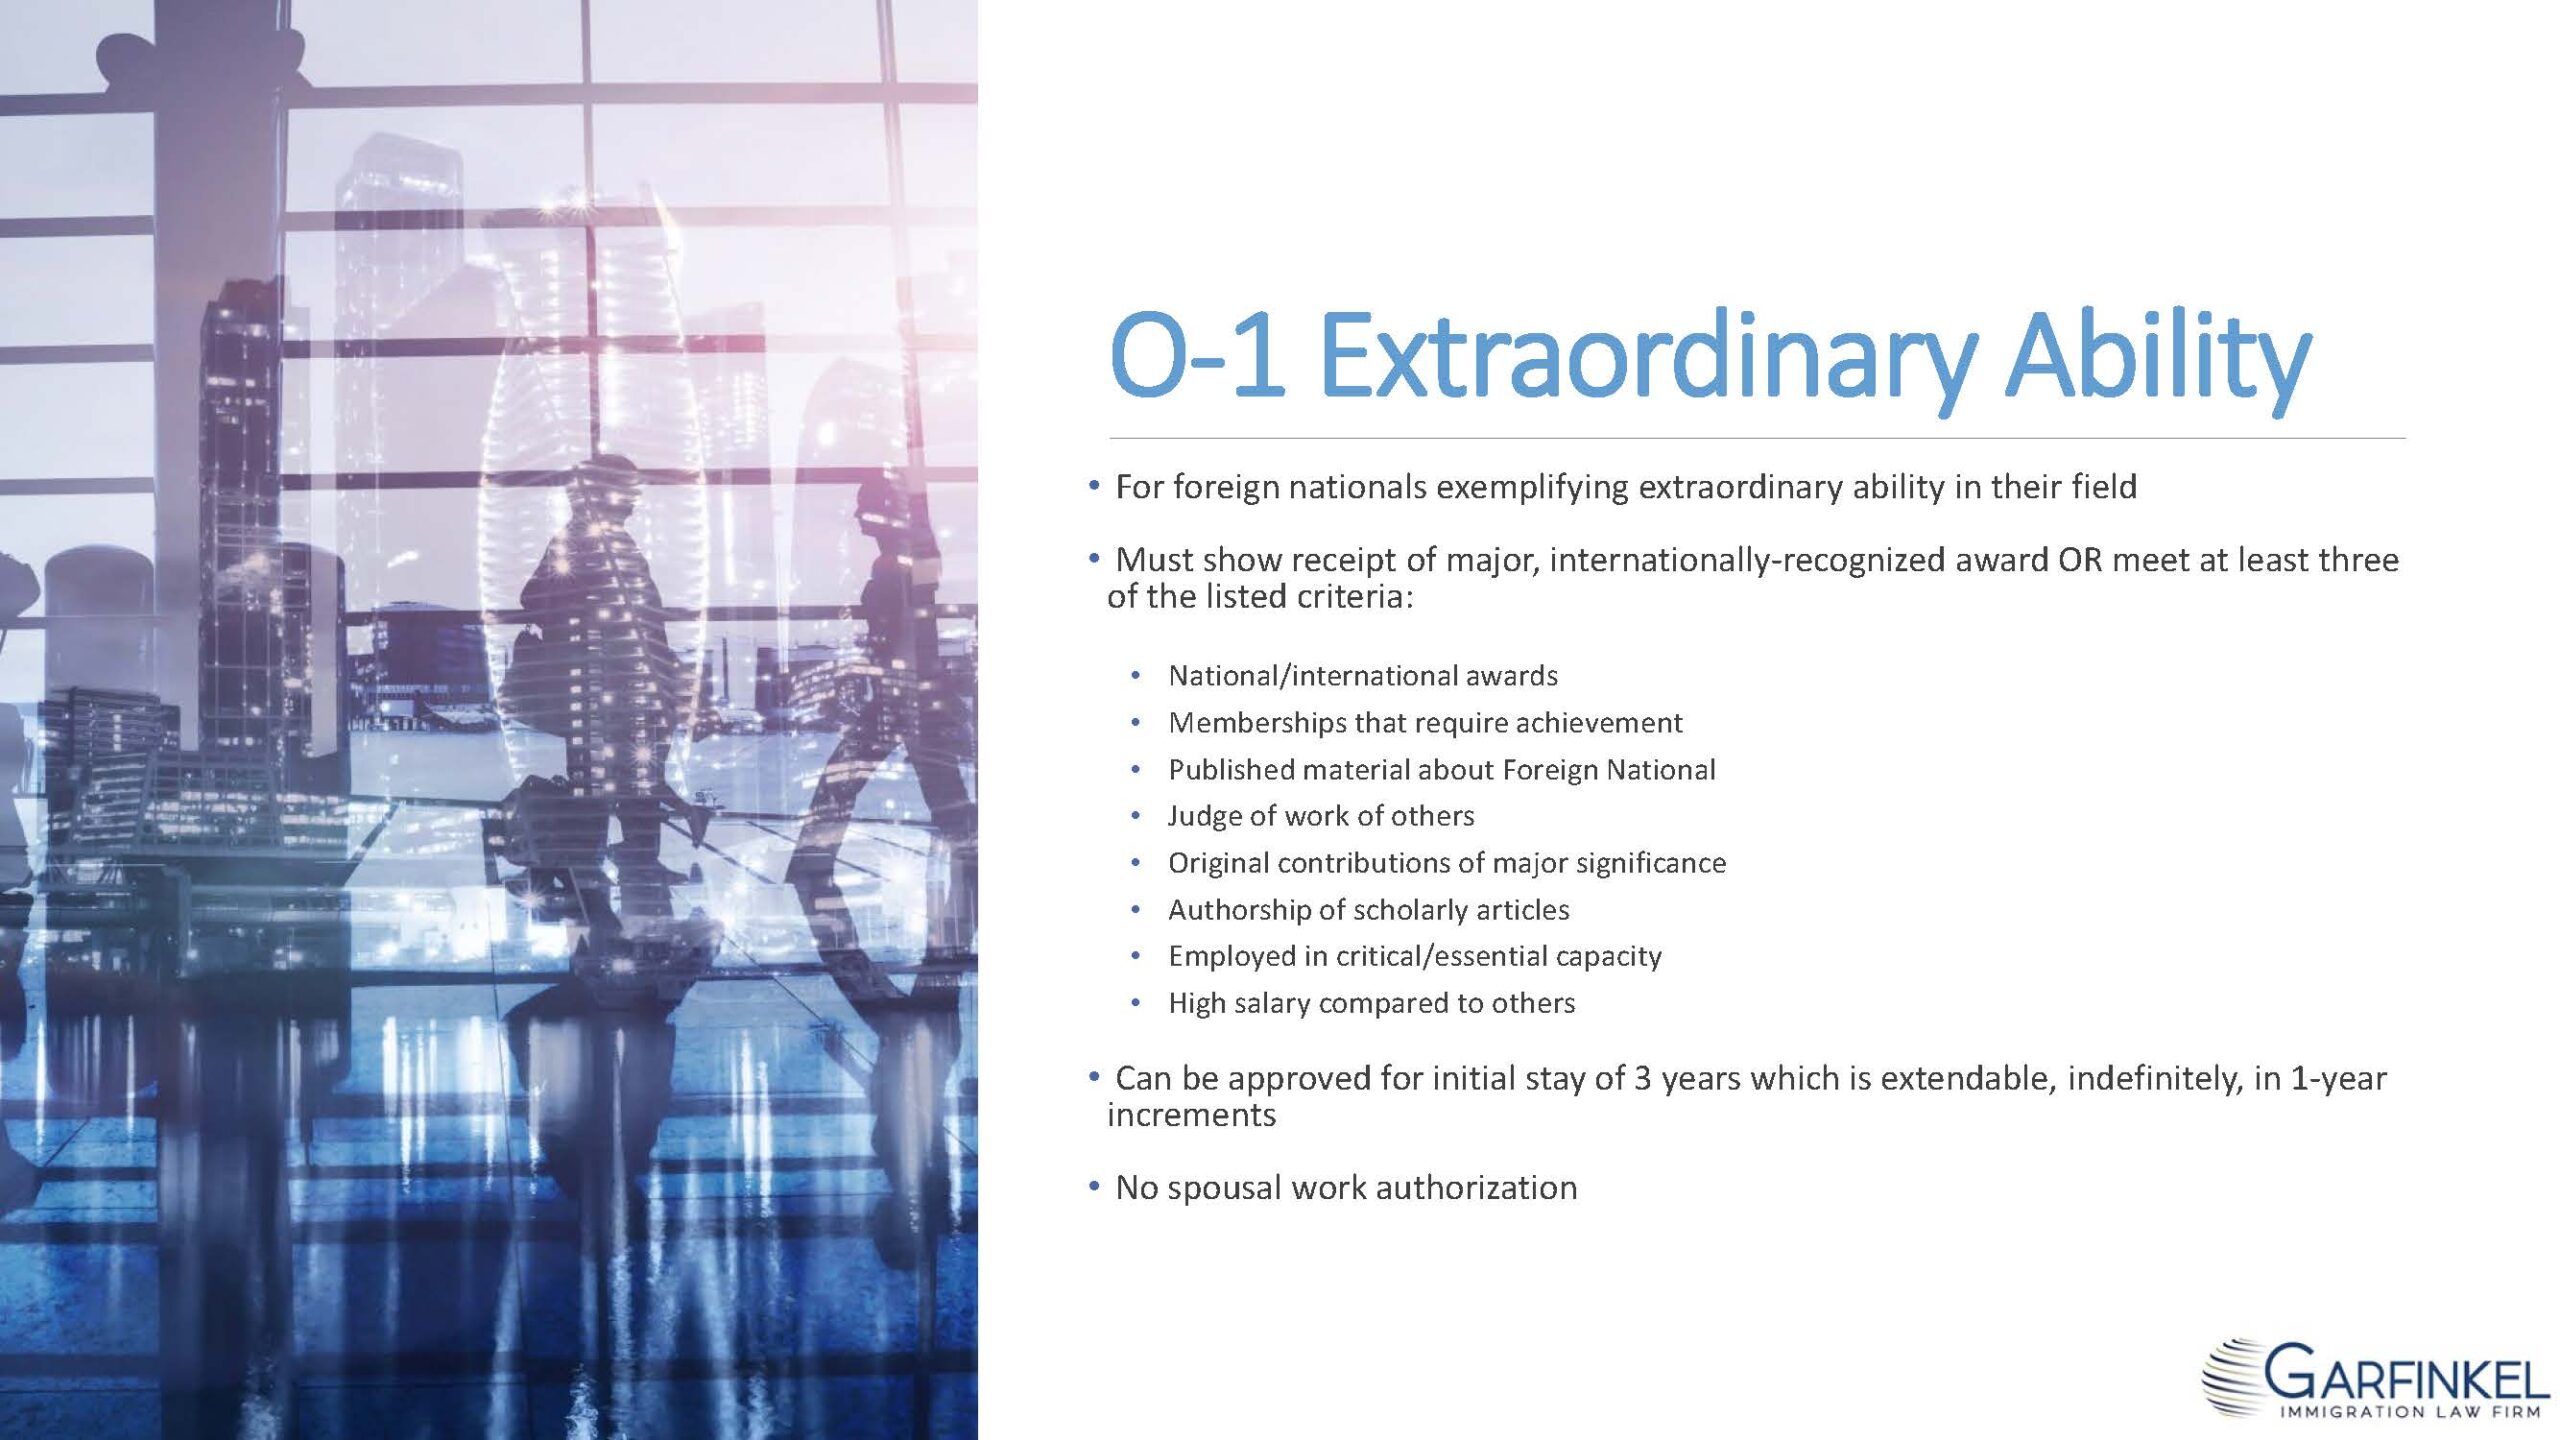 O-1 Extraordinary Ability.  For foreign nationals exemplifying extraordinary ability in their field. Must show receipt of major, internationally-recognized award OR meet at least three of the listed criteria: National/international awards, Memberships that require achievement, Published material about Foreign National, Judge of work of others, Original contributions of major significance, Authorship of scholarly articles, Employed in critical/essential capacity, High salary compared to others. Can be approved for initial stay of 3 years which is extendable, indefinitely, in 1-year increments. No spousal work authorization.
